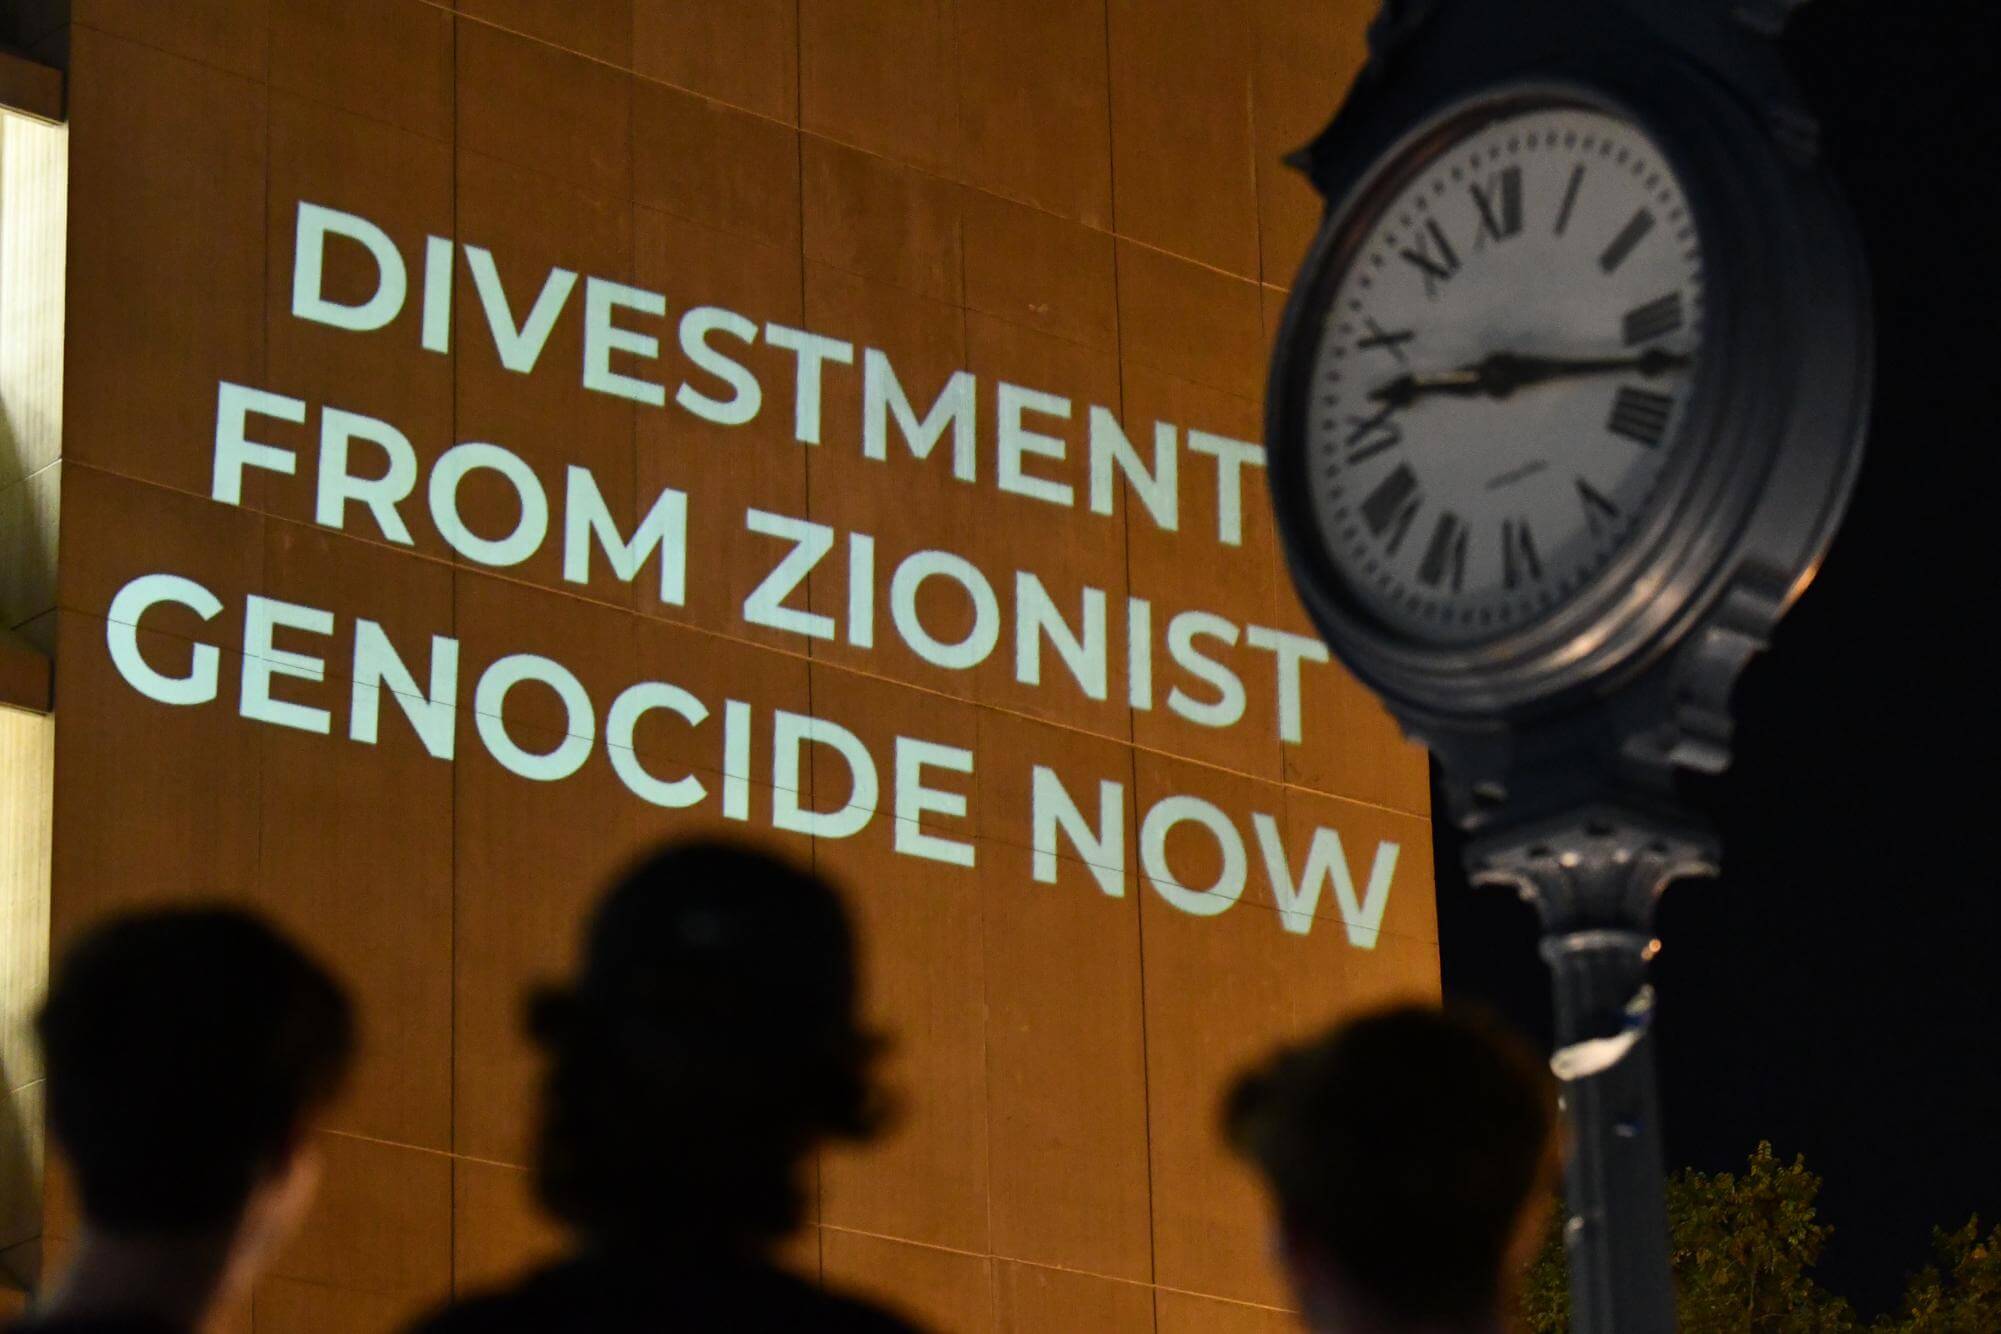 The facade of George Washington University's library was lit up with anti-Israel slogans. 